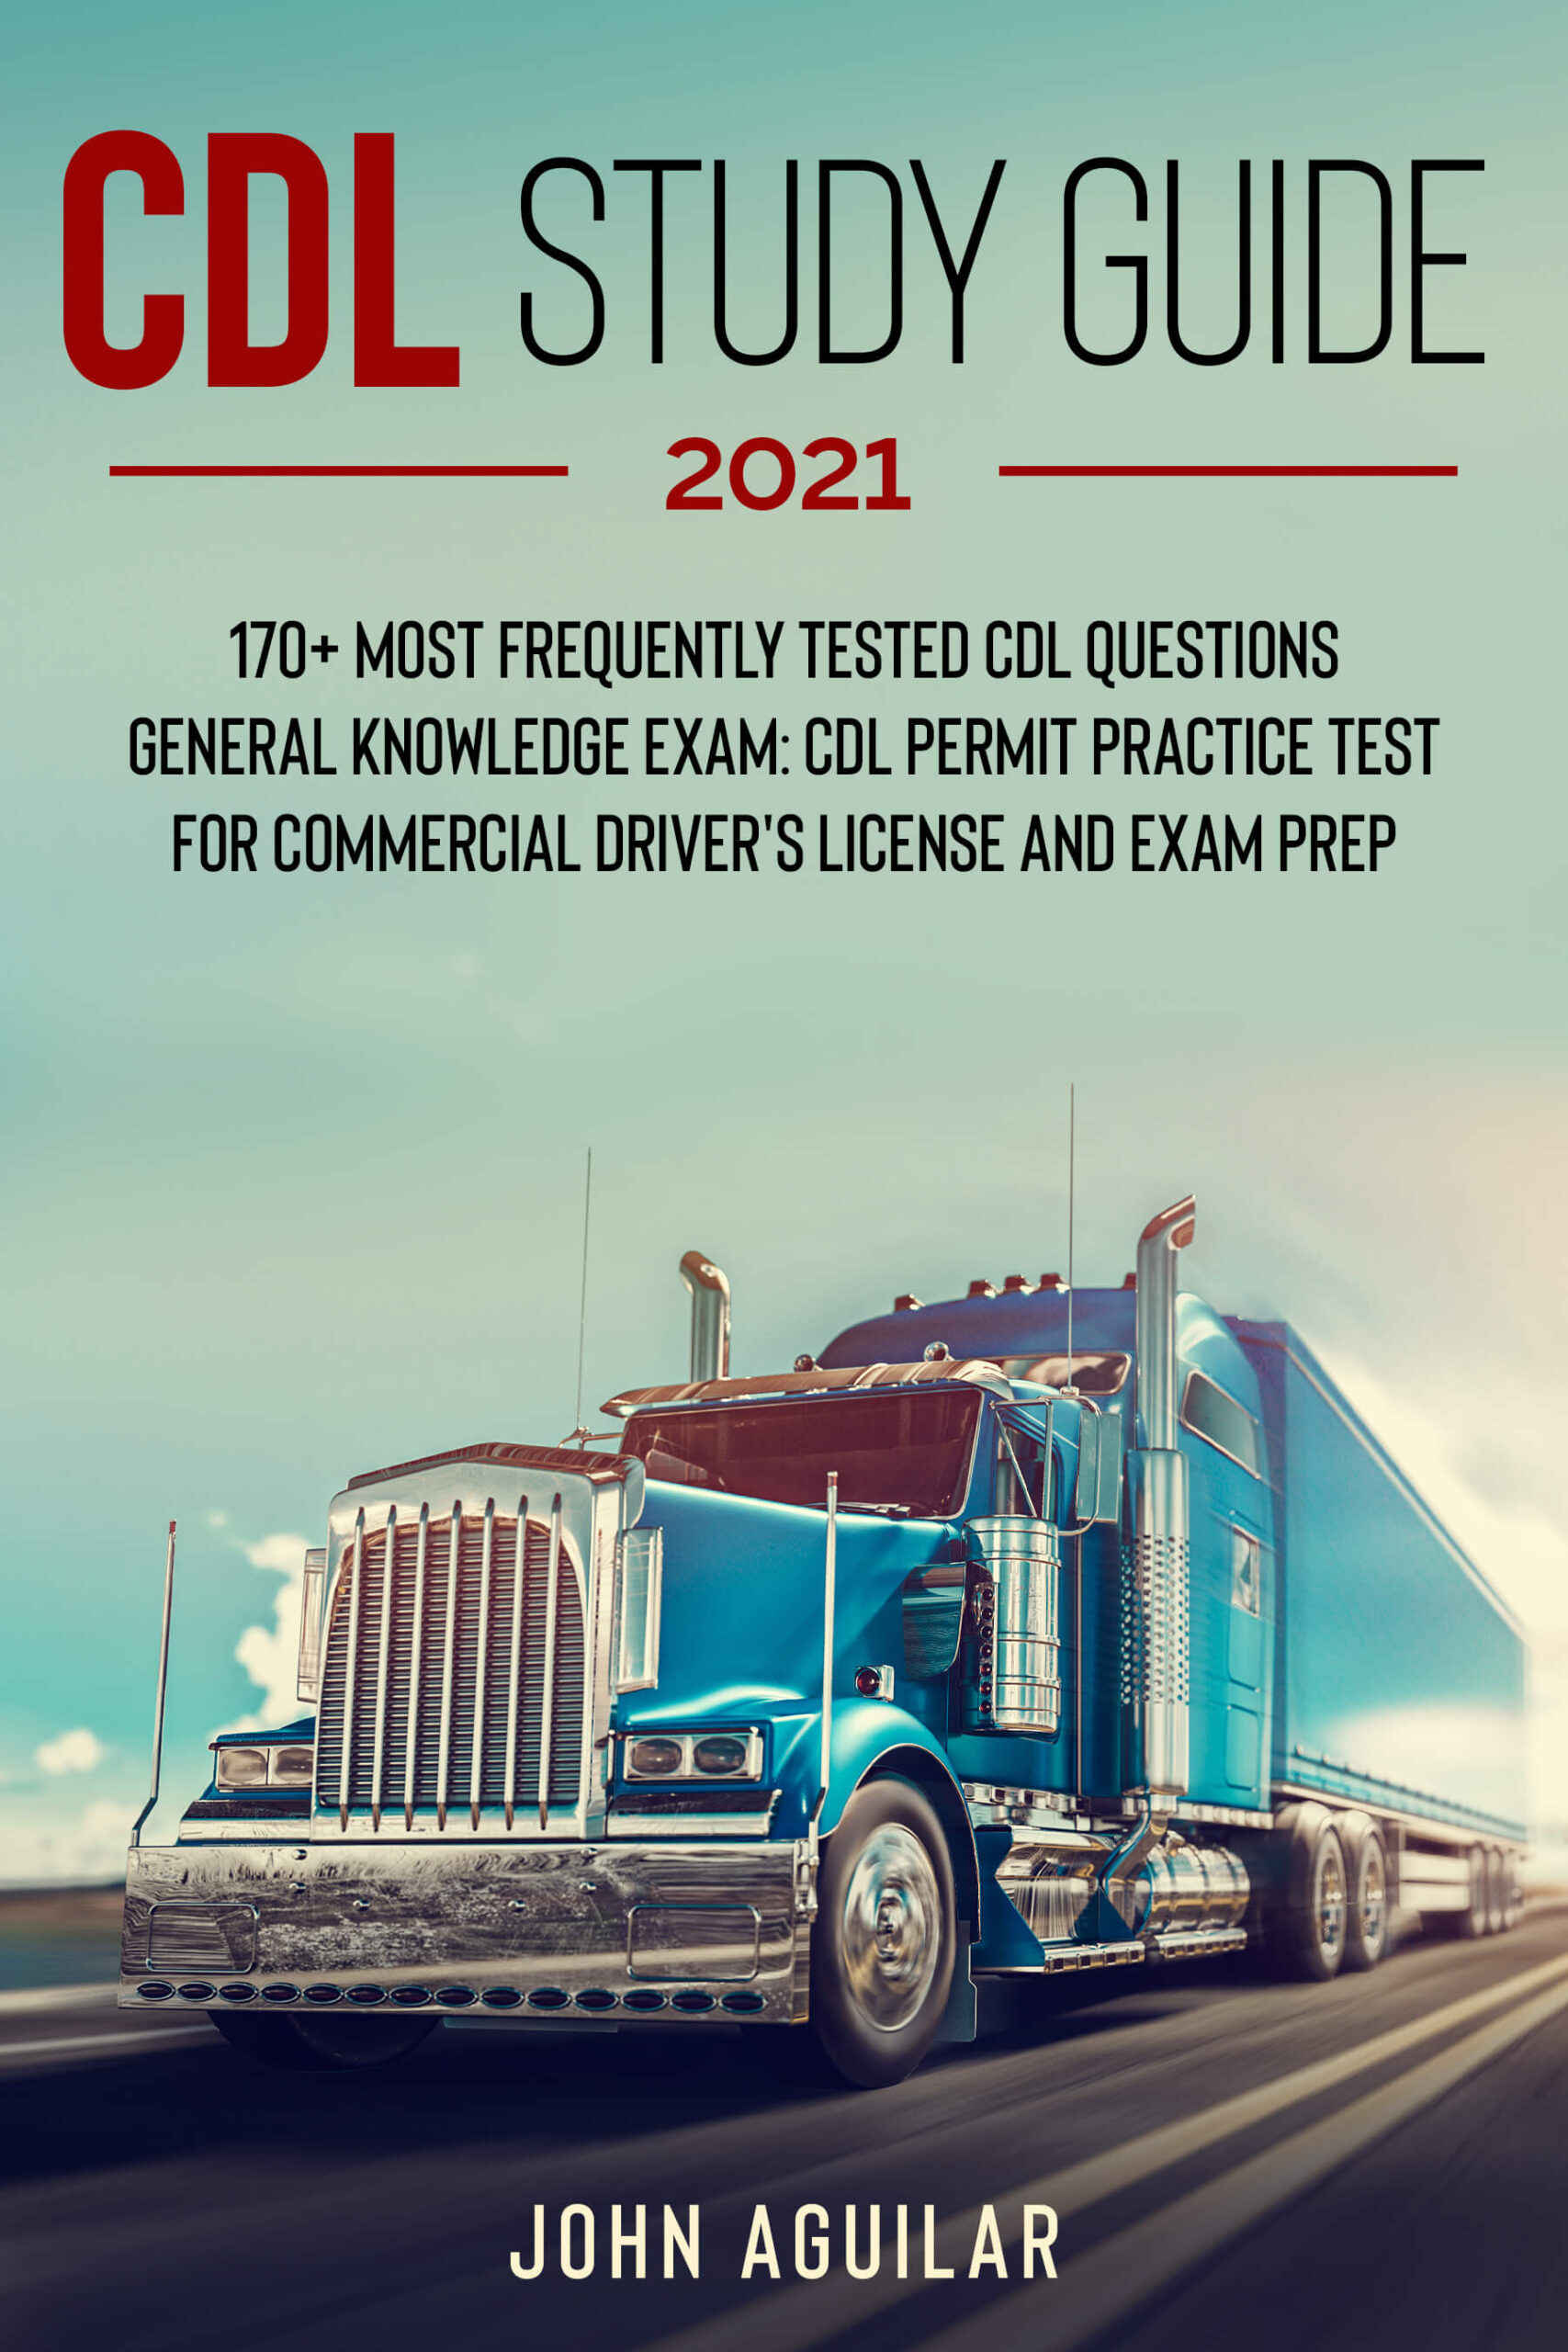 FREE: CDL Study Guide 2021 by John Aguilar